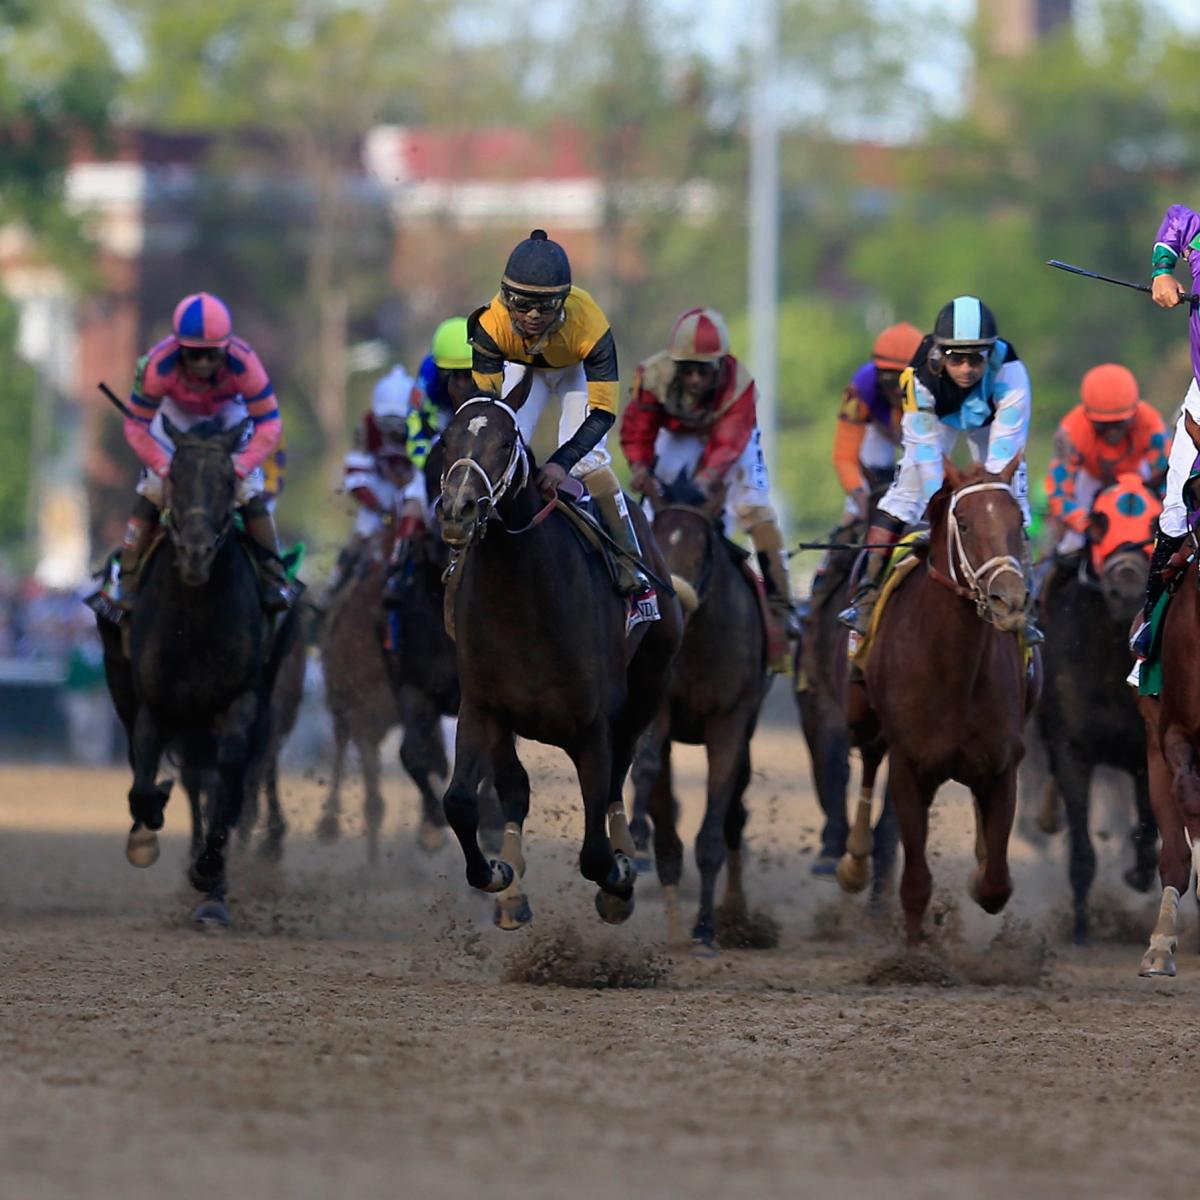 Preakness Draw 2014 Full Schedule and Live Stream Info for Post